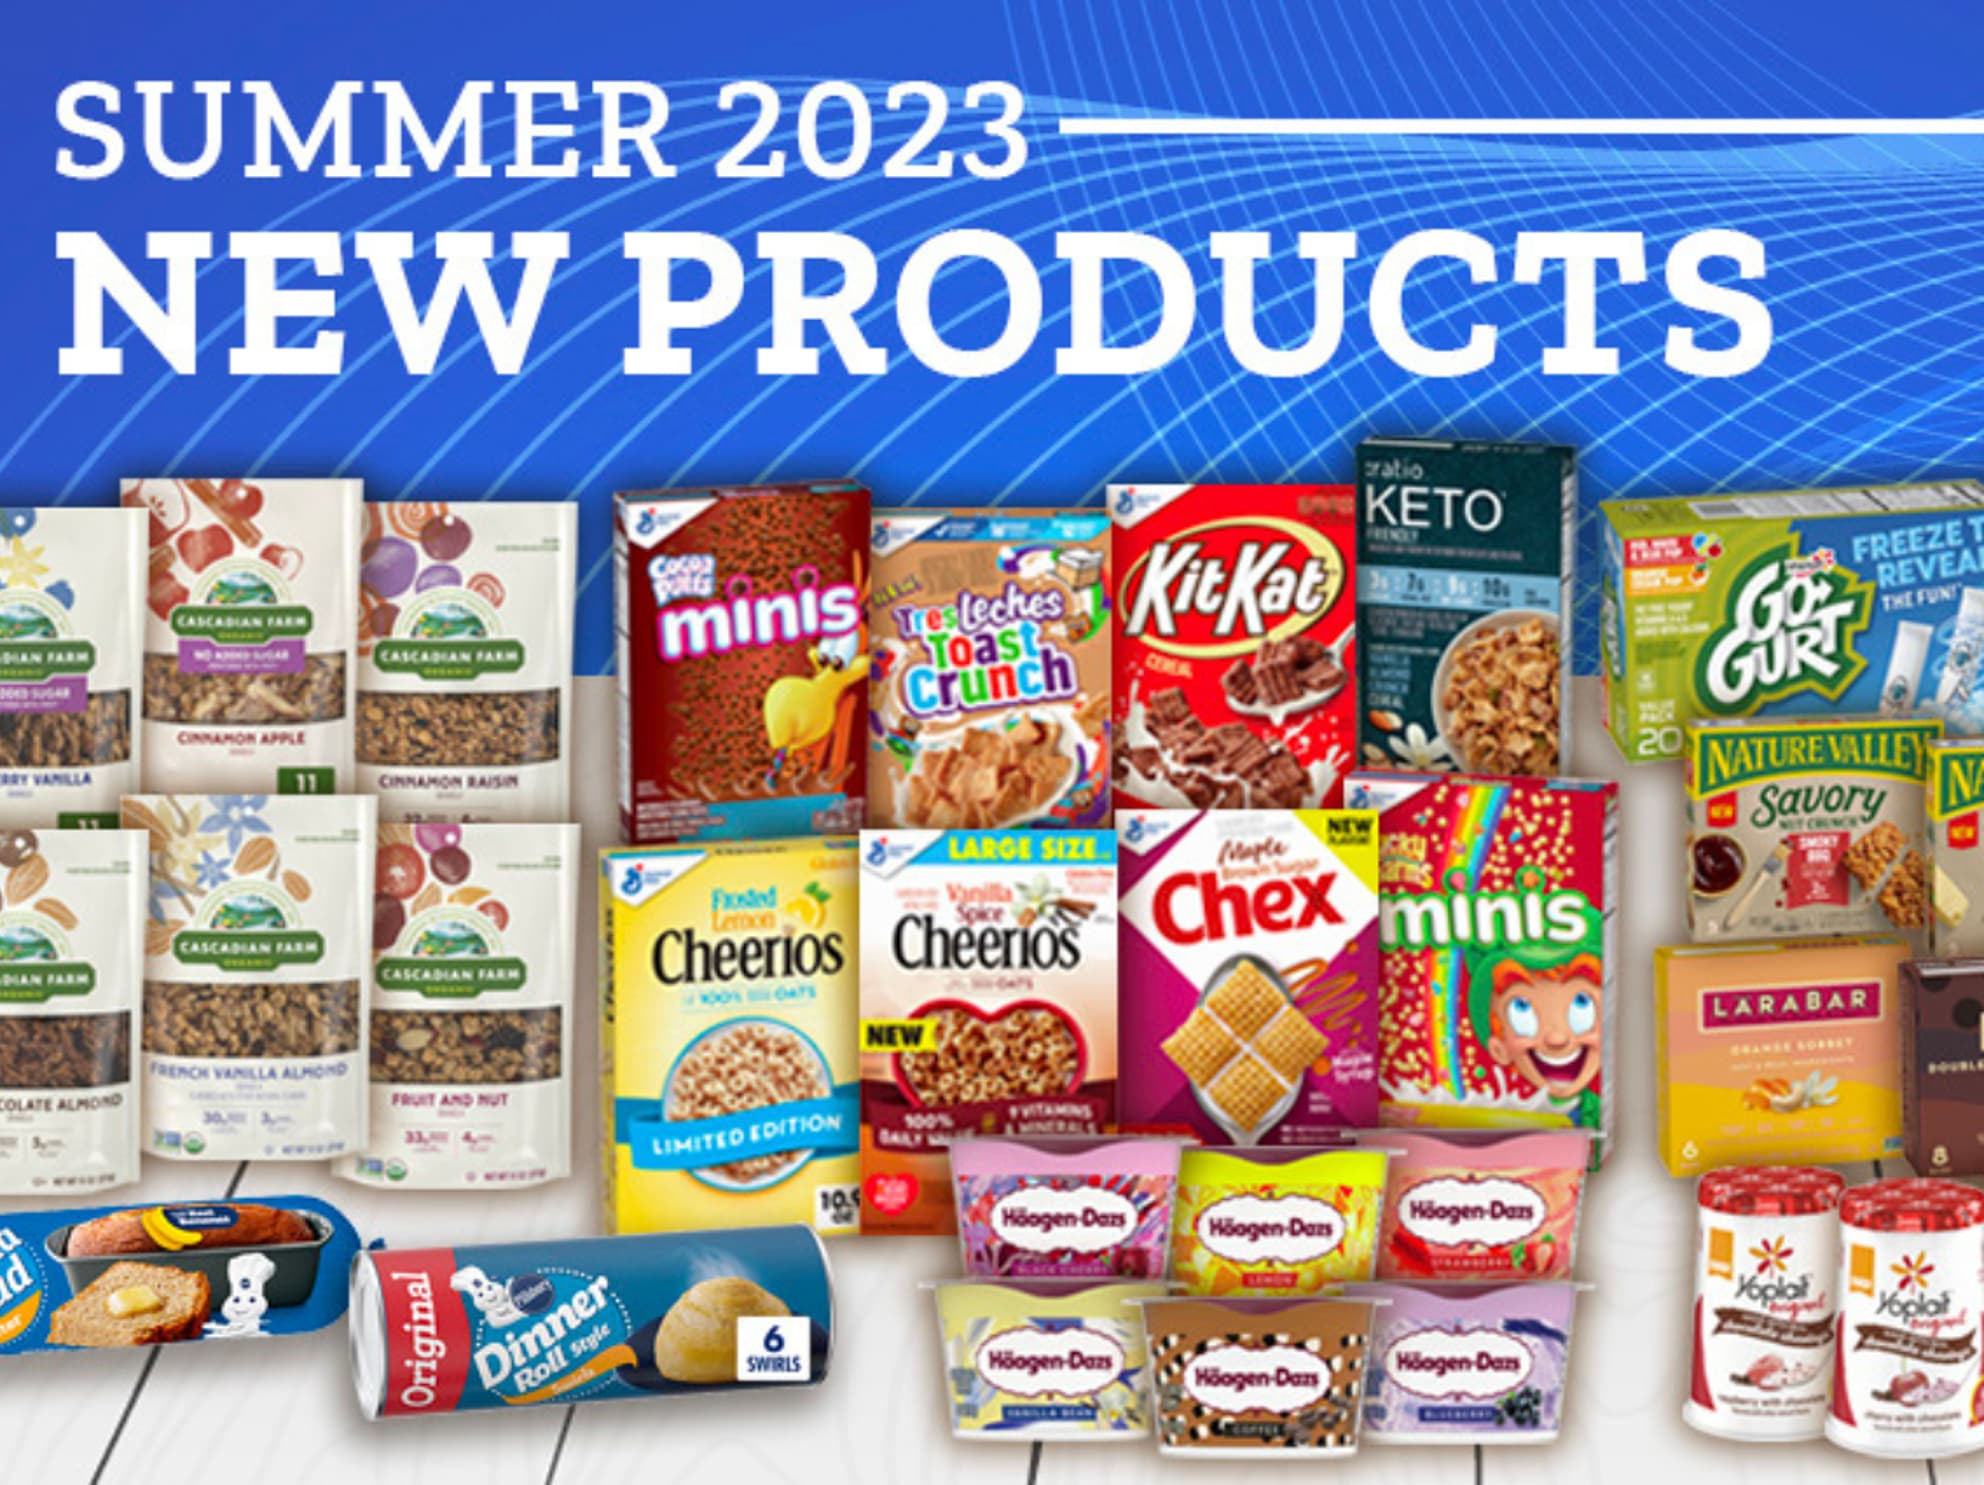 New products for summer 2023 - General Mills